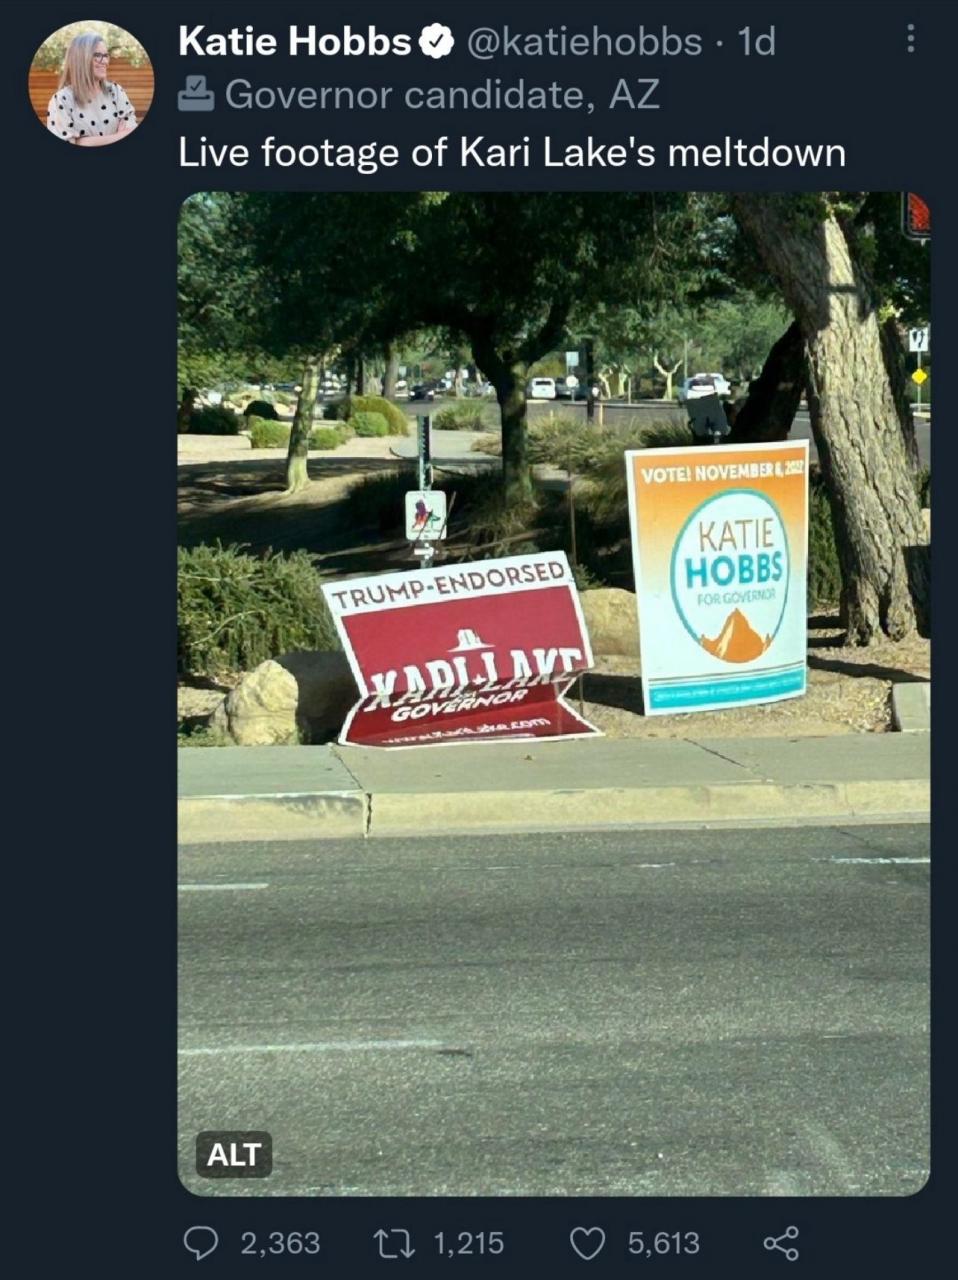 SIGN THIEVES BEWARE: Woman Cited For “Tampering/Removal Of Political Signs” After Patriots In Maricopa County Implant GPS Tracking Device In Stolen Signs